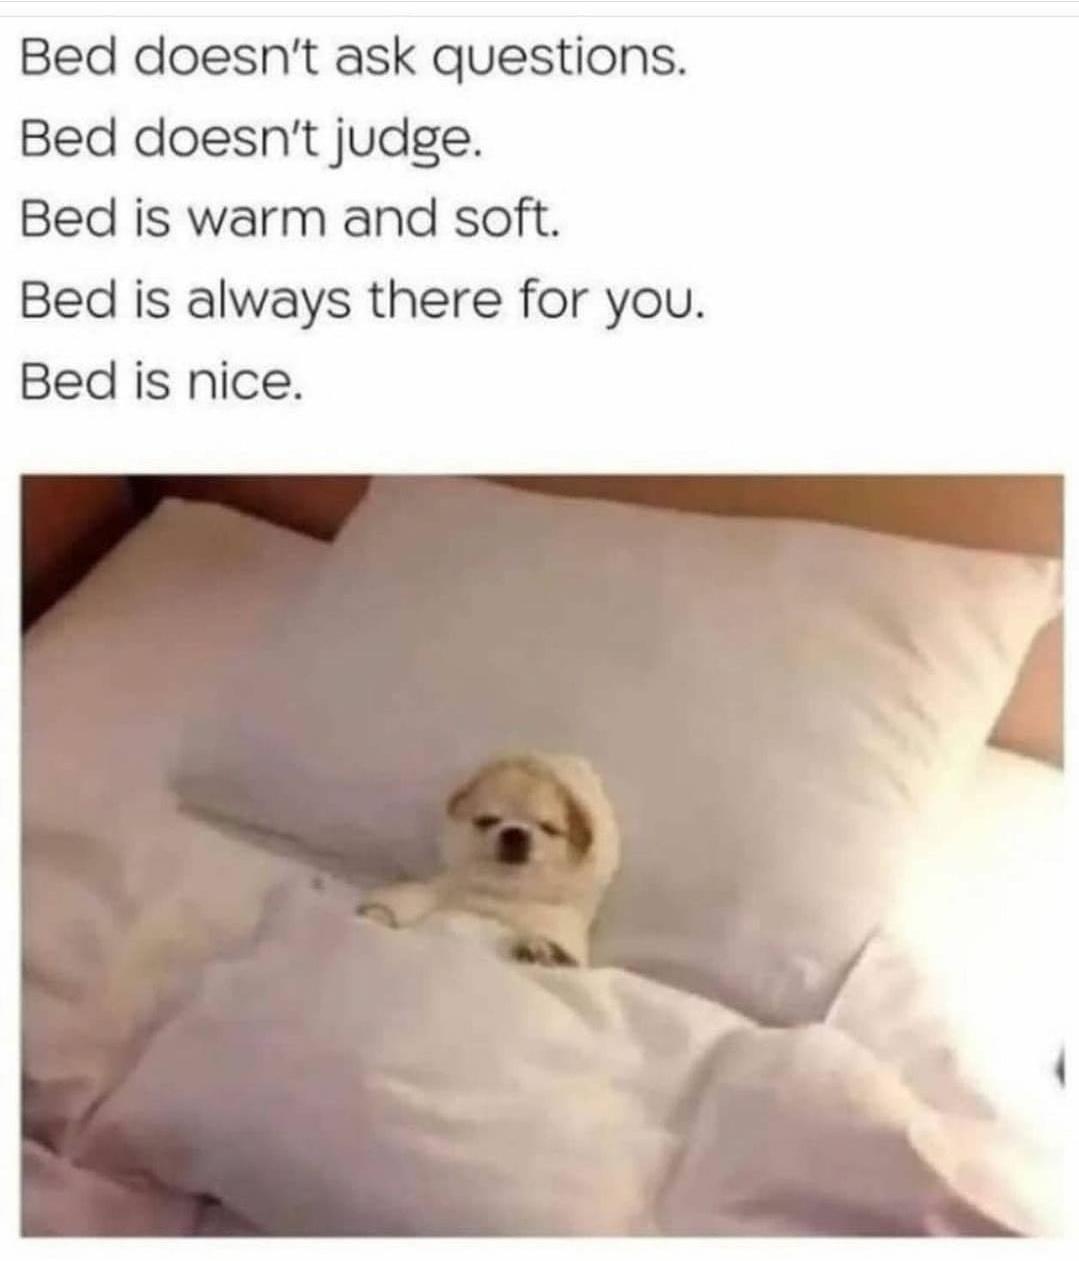 fresh memes - meme bed - Bed doesn't ask questions. Bed doesn't judge. Bed is warm and soft. Bed is always there for you. Bed is nice.